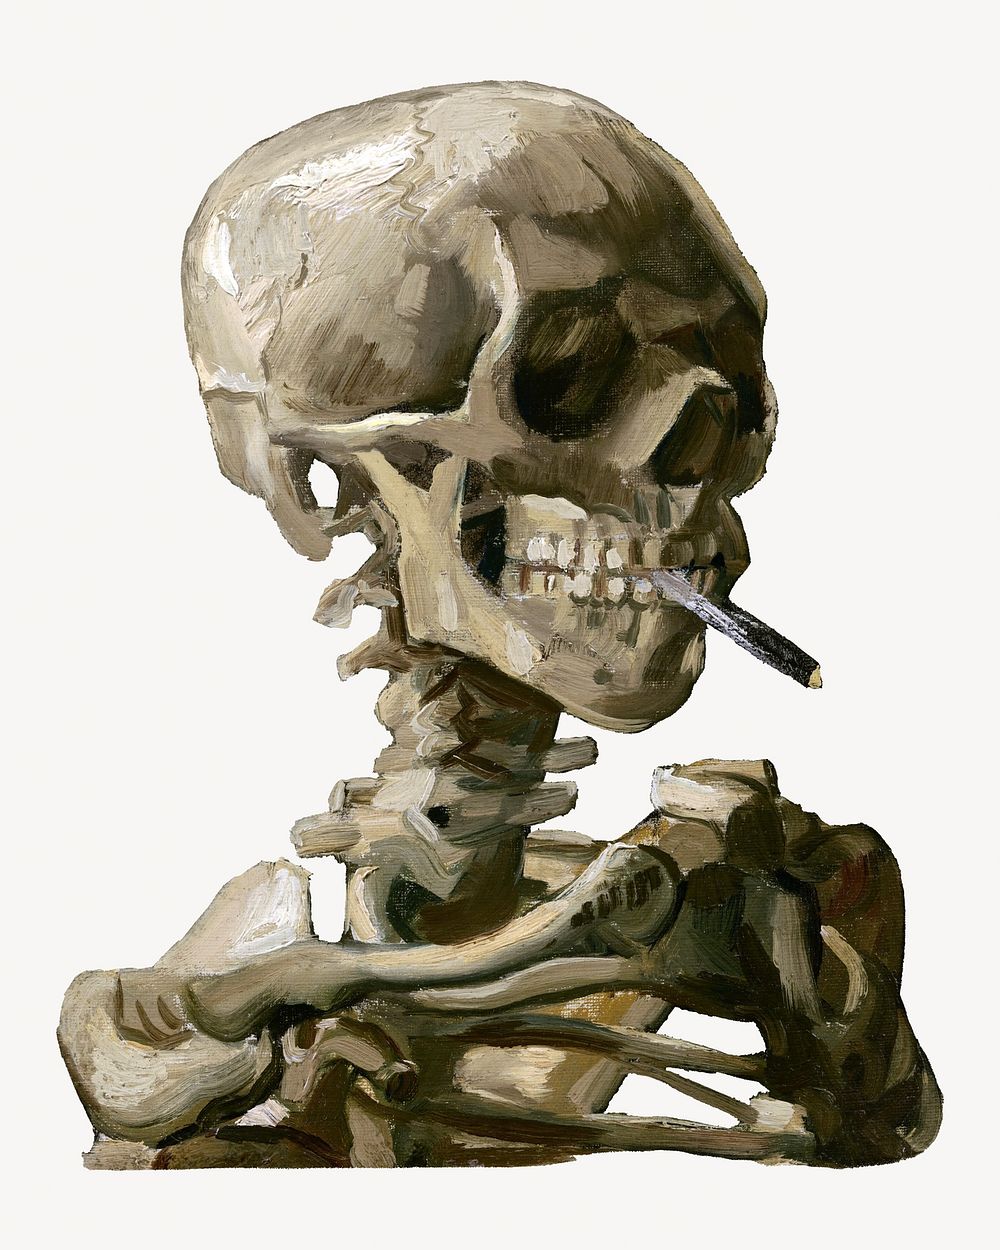 Aesthetic Vincent van Gogh's smoking skull illustration.  Remastered by rawpixel